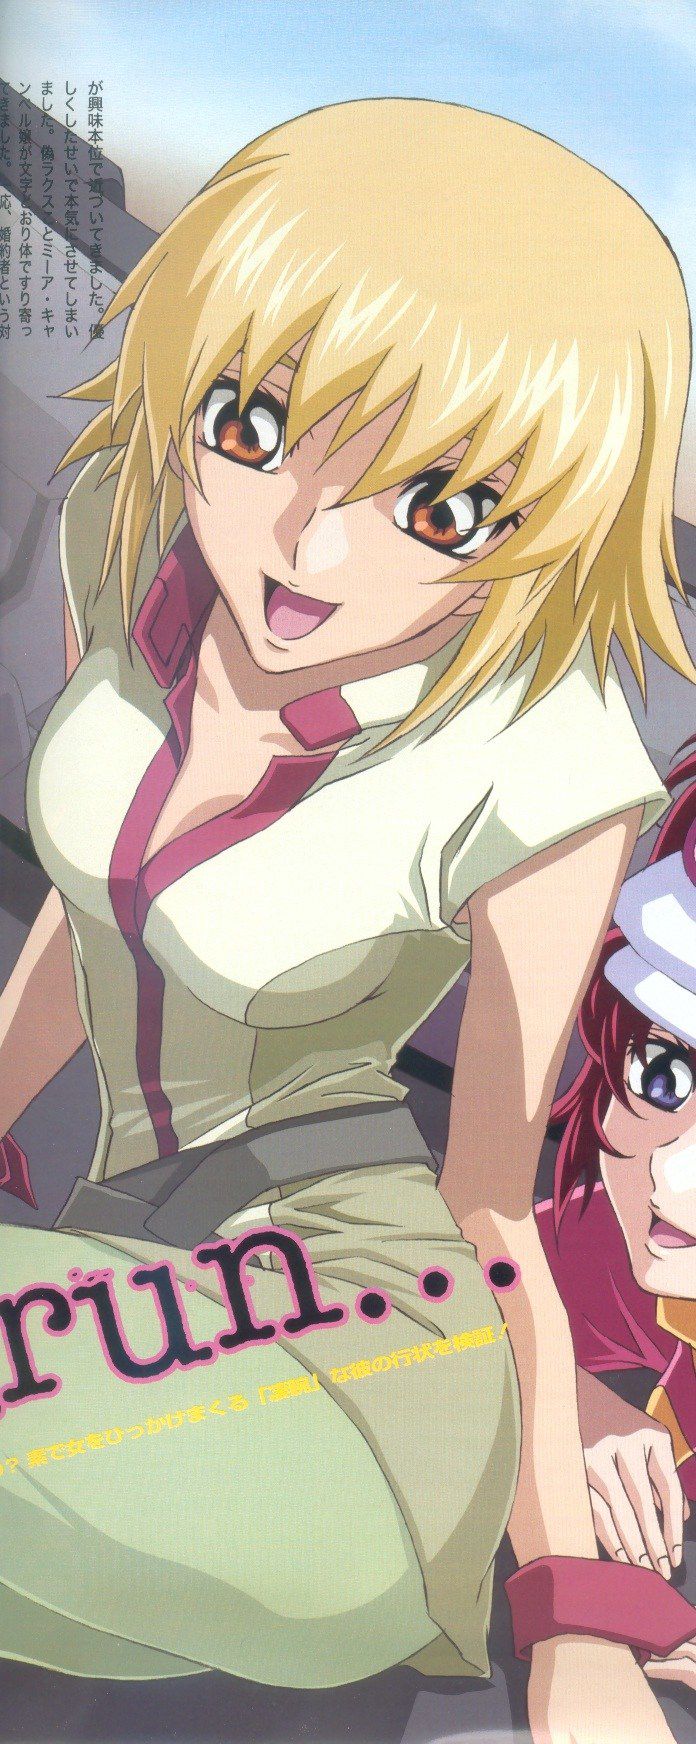 [64 photos] Mobile Suit Gundam SEED, cagalli yula athha erotic pictures! 64